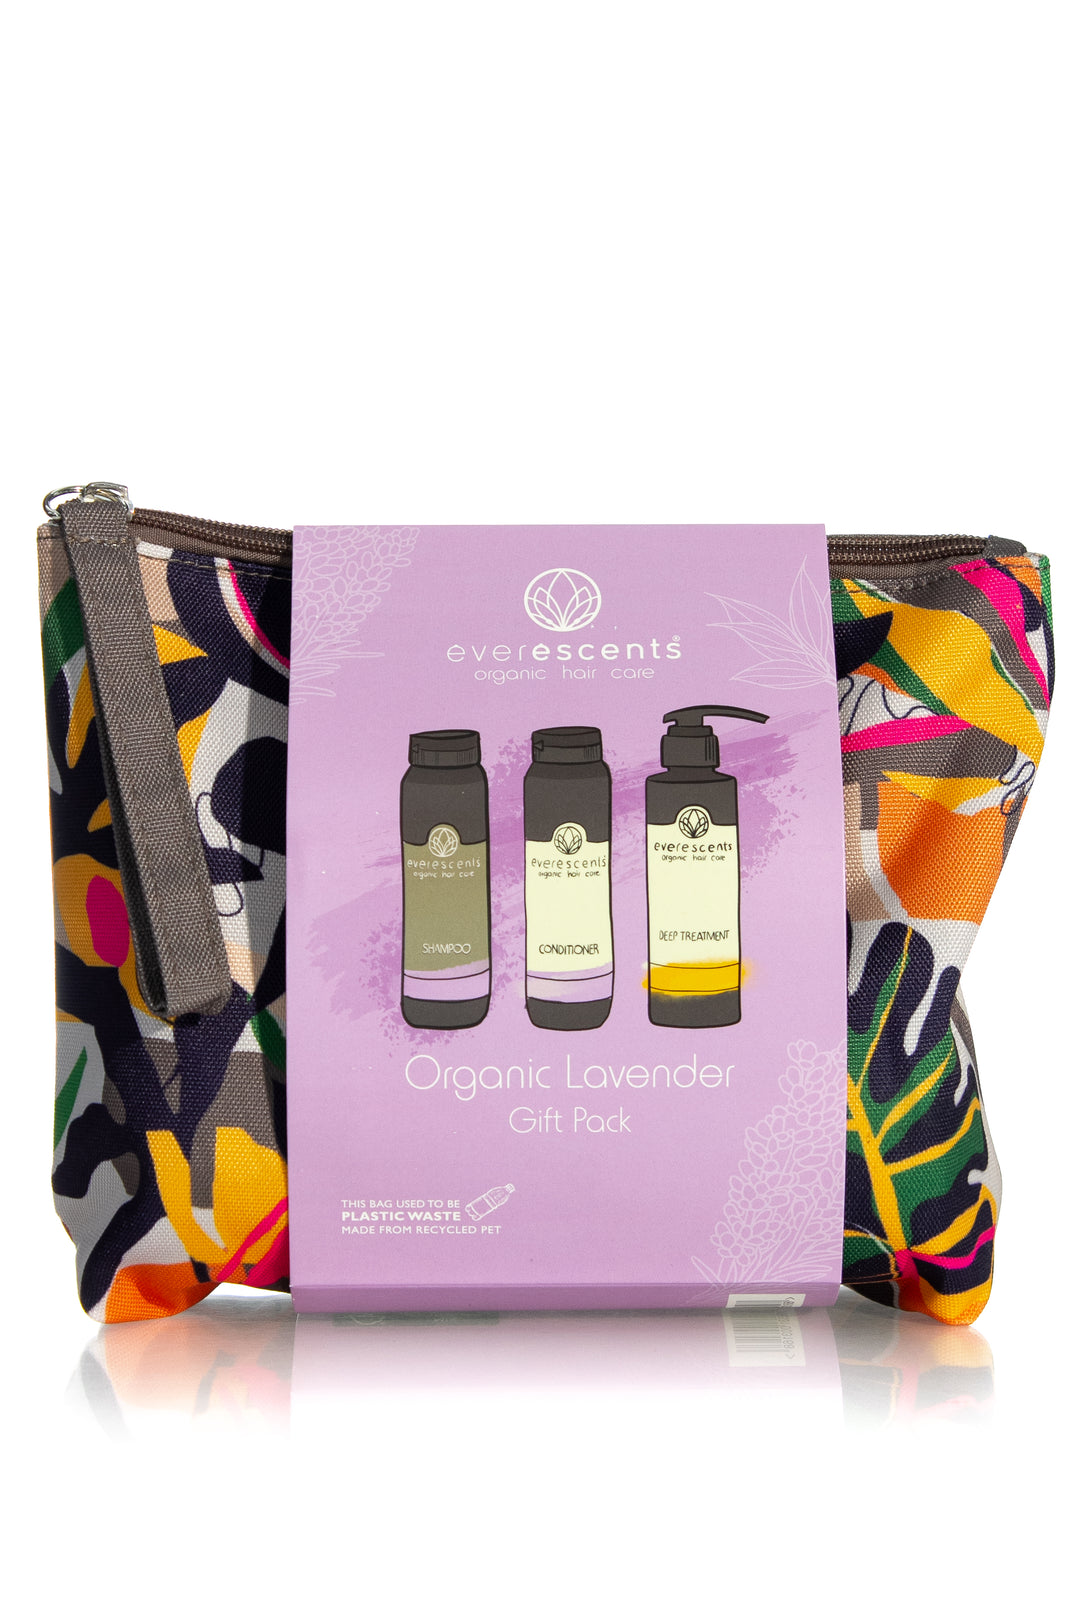 Everescents Lavender Gift Pack with Deep Treatment